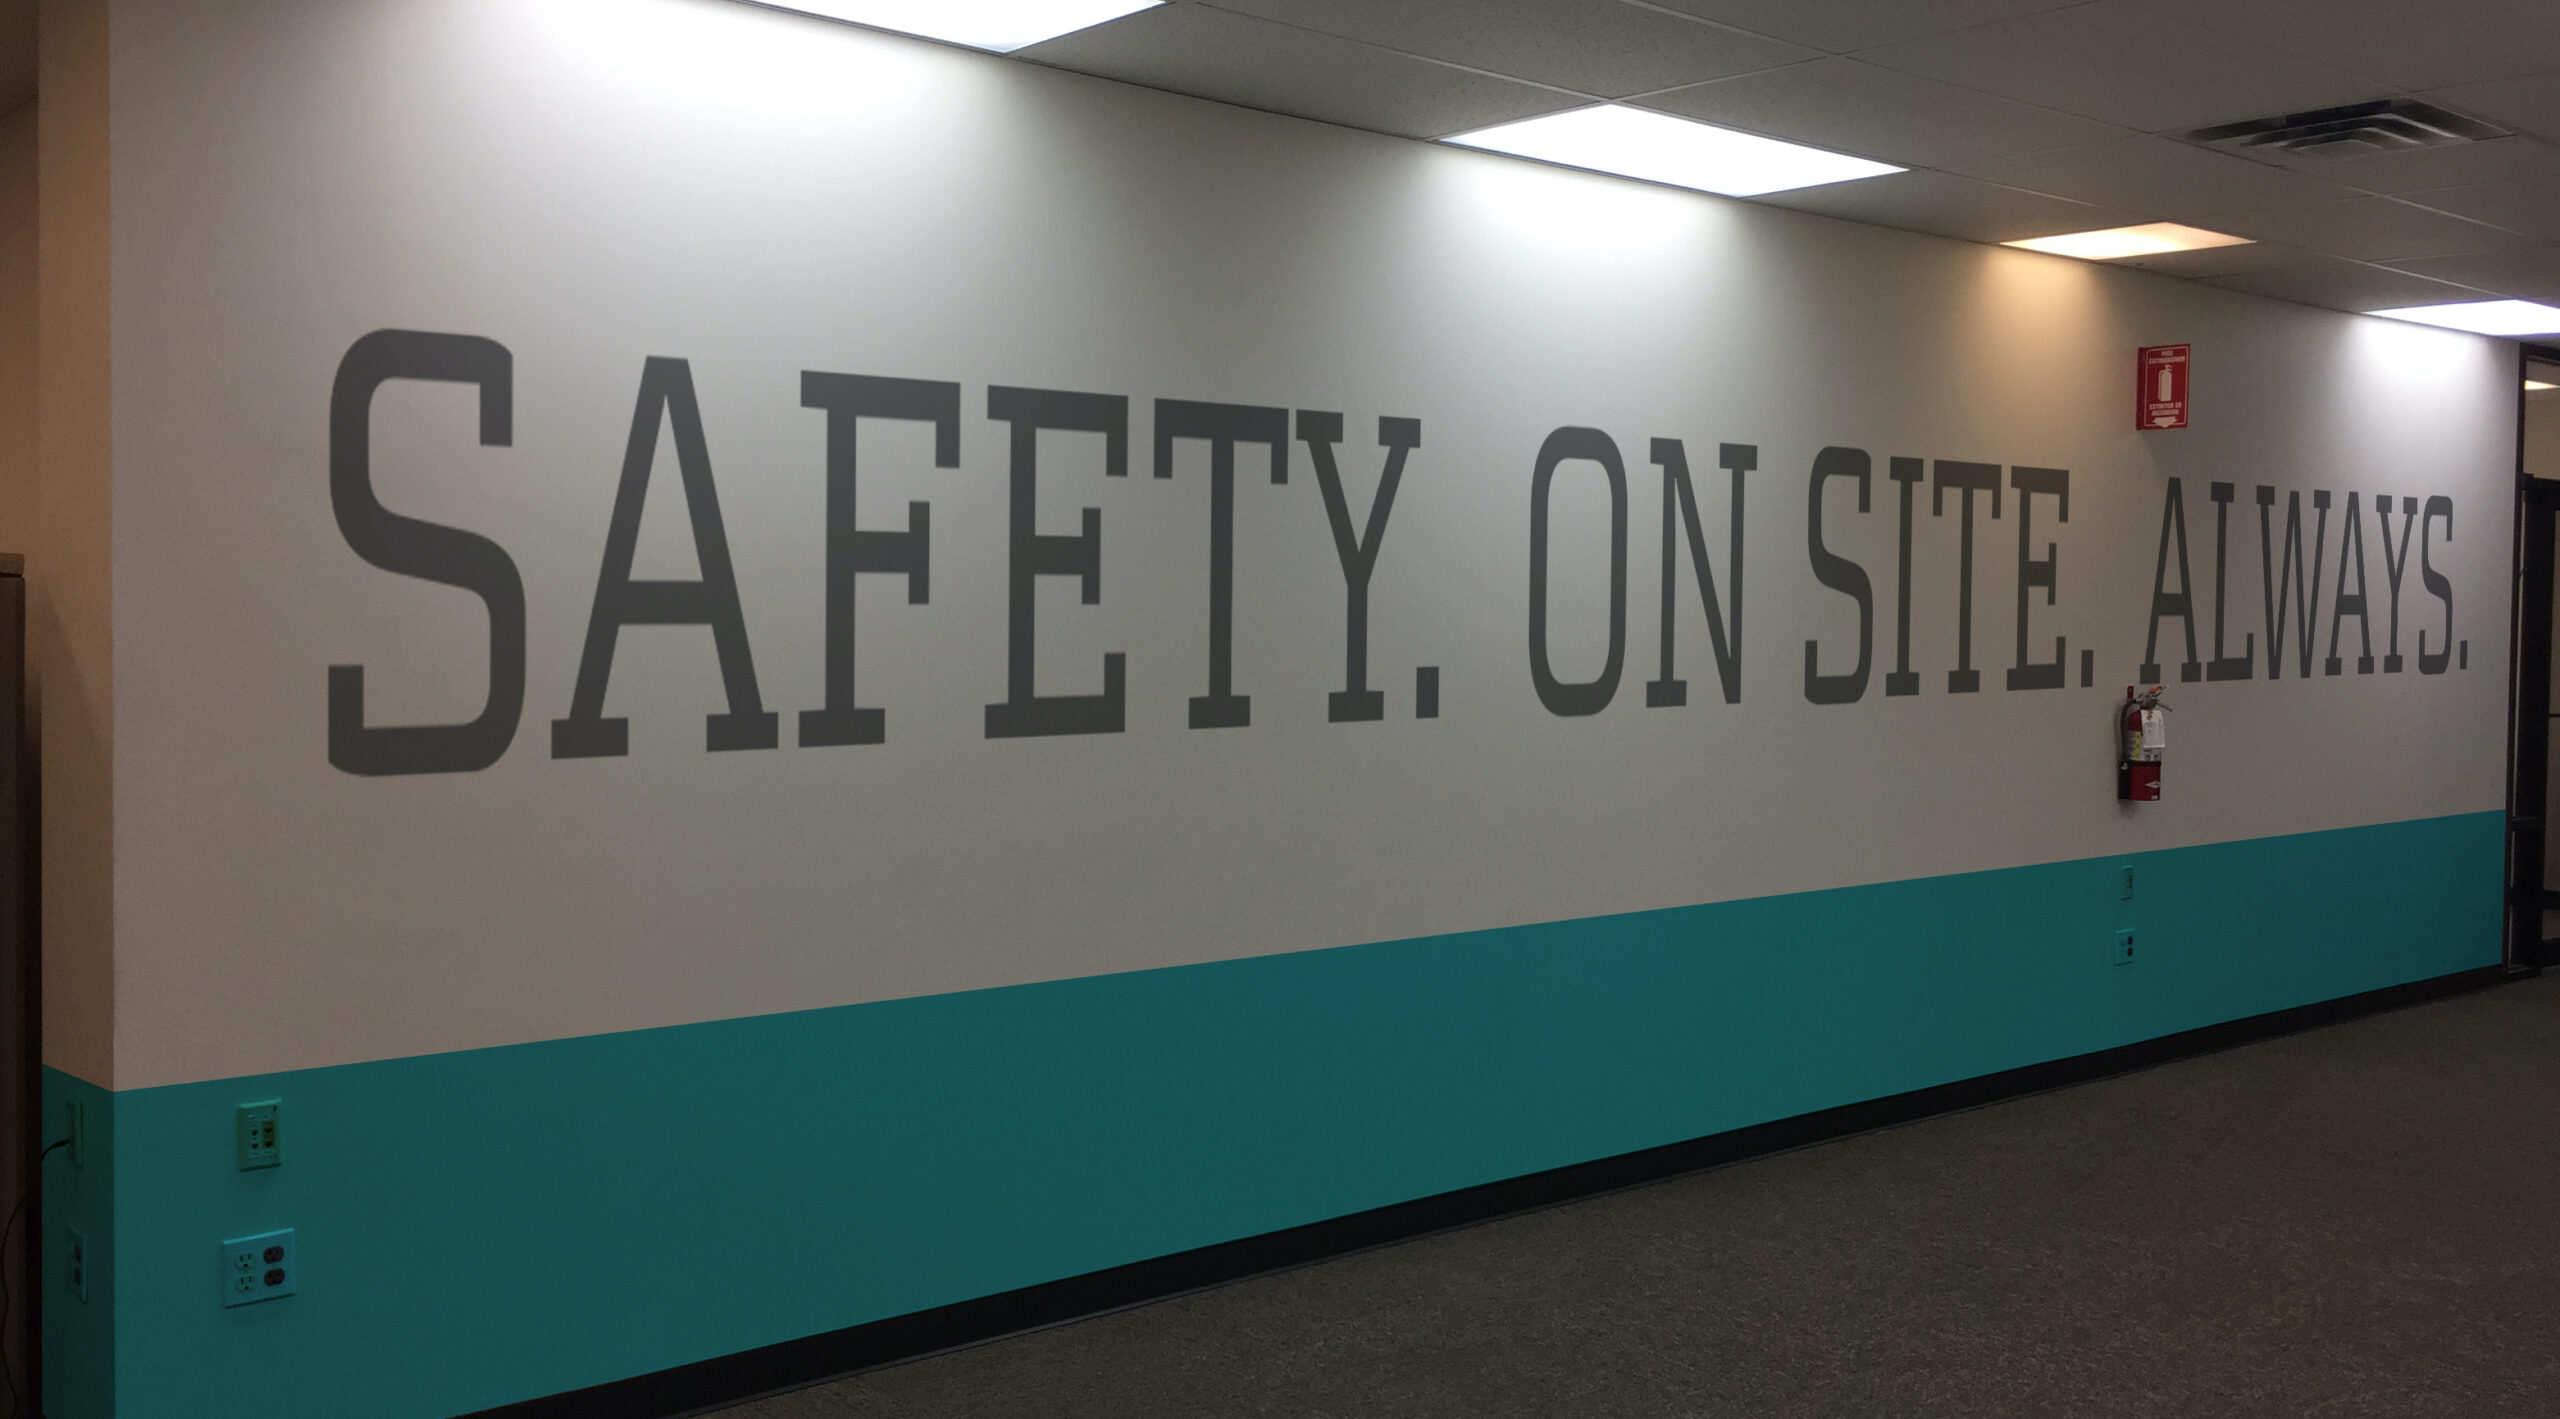 Airgas On Site Safety office wall graphics